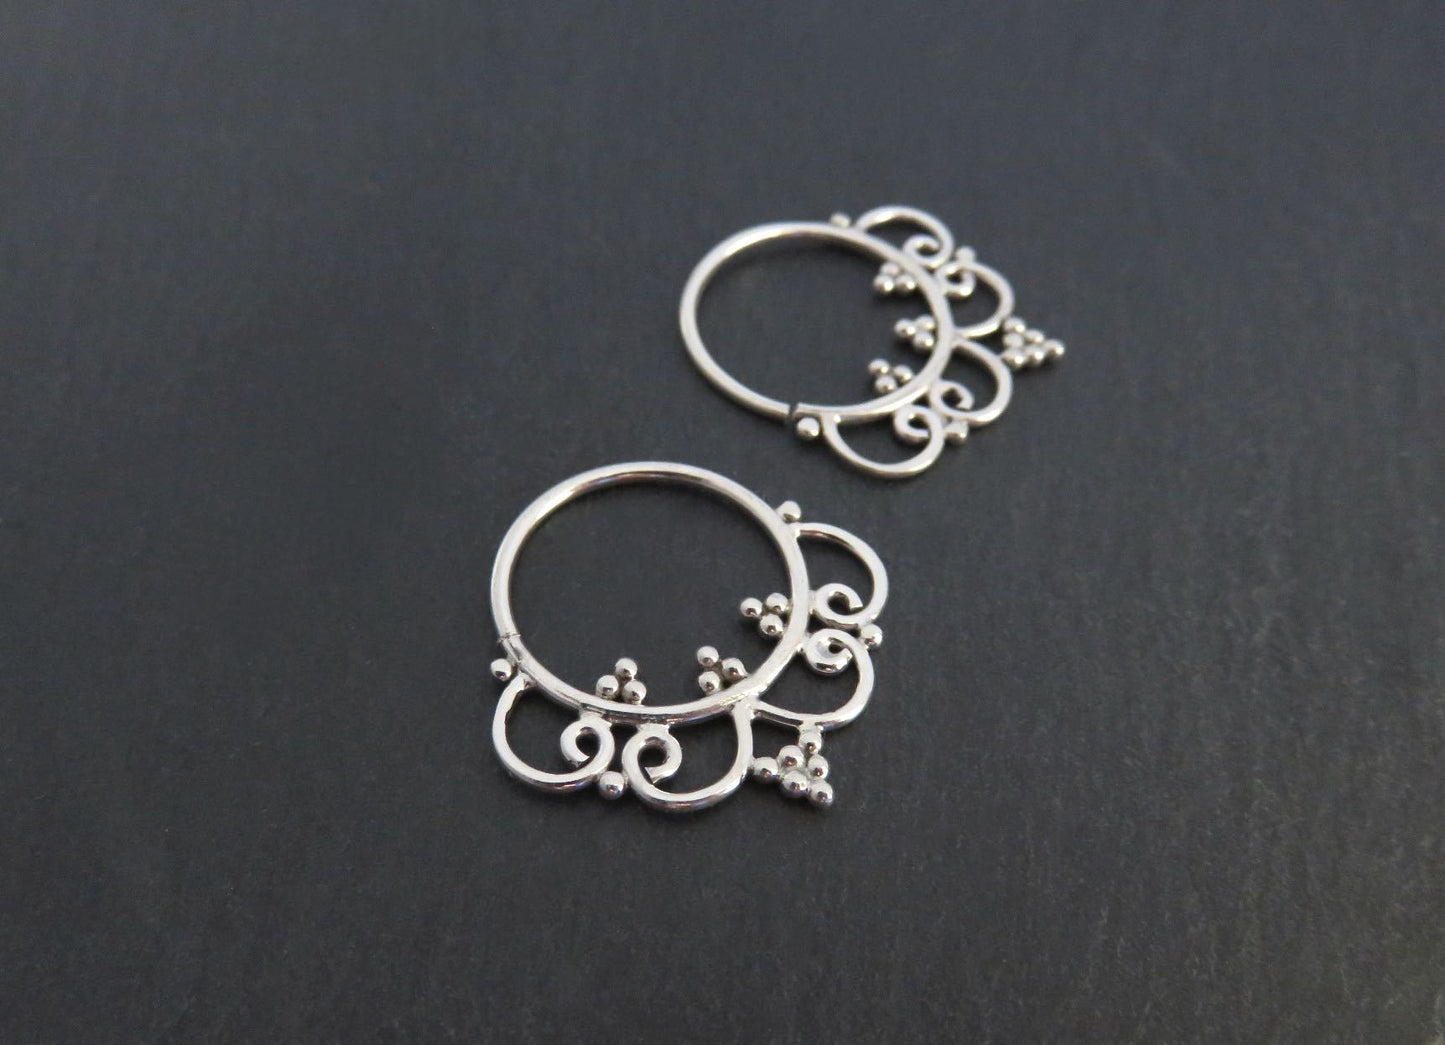 small hoop earrings decorated with dots and spirals made of silver